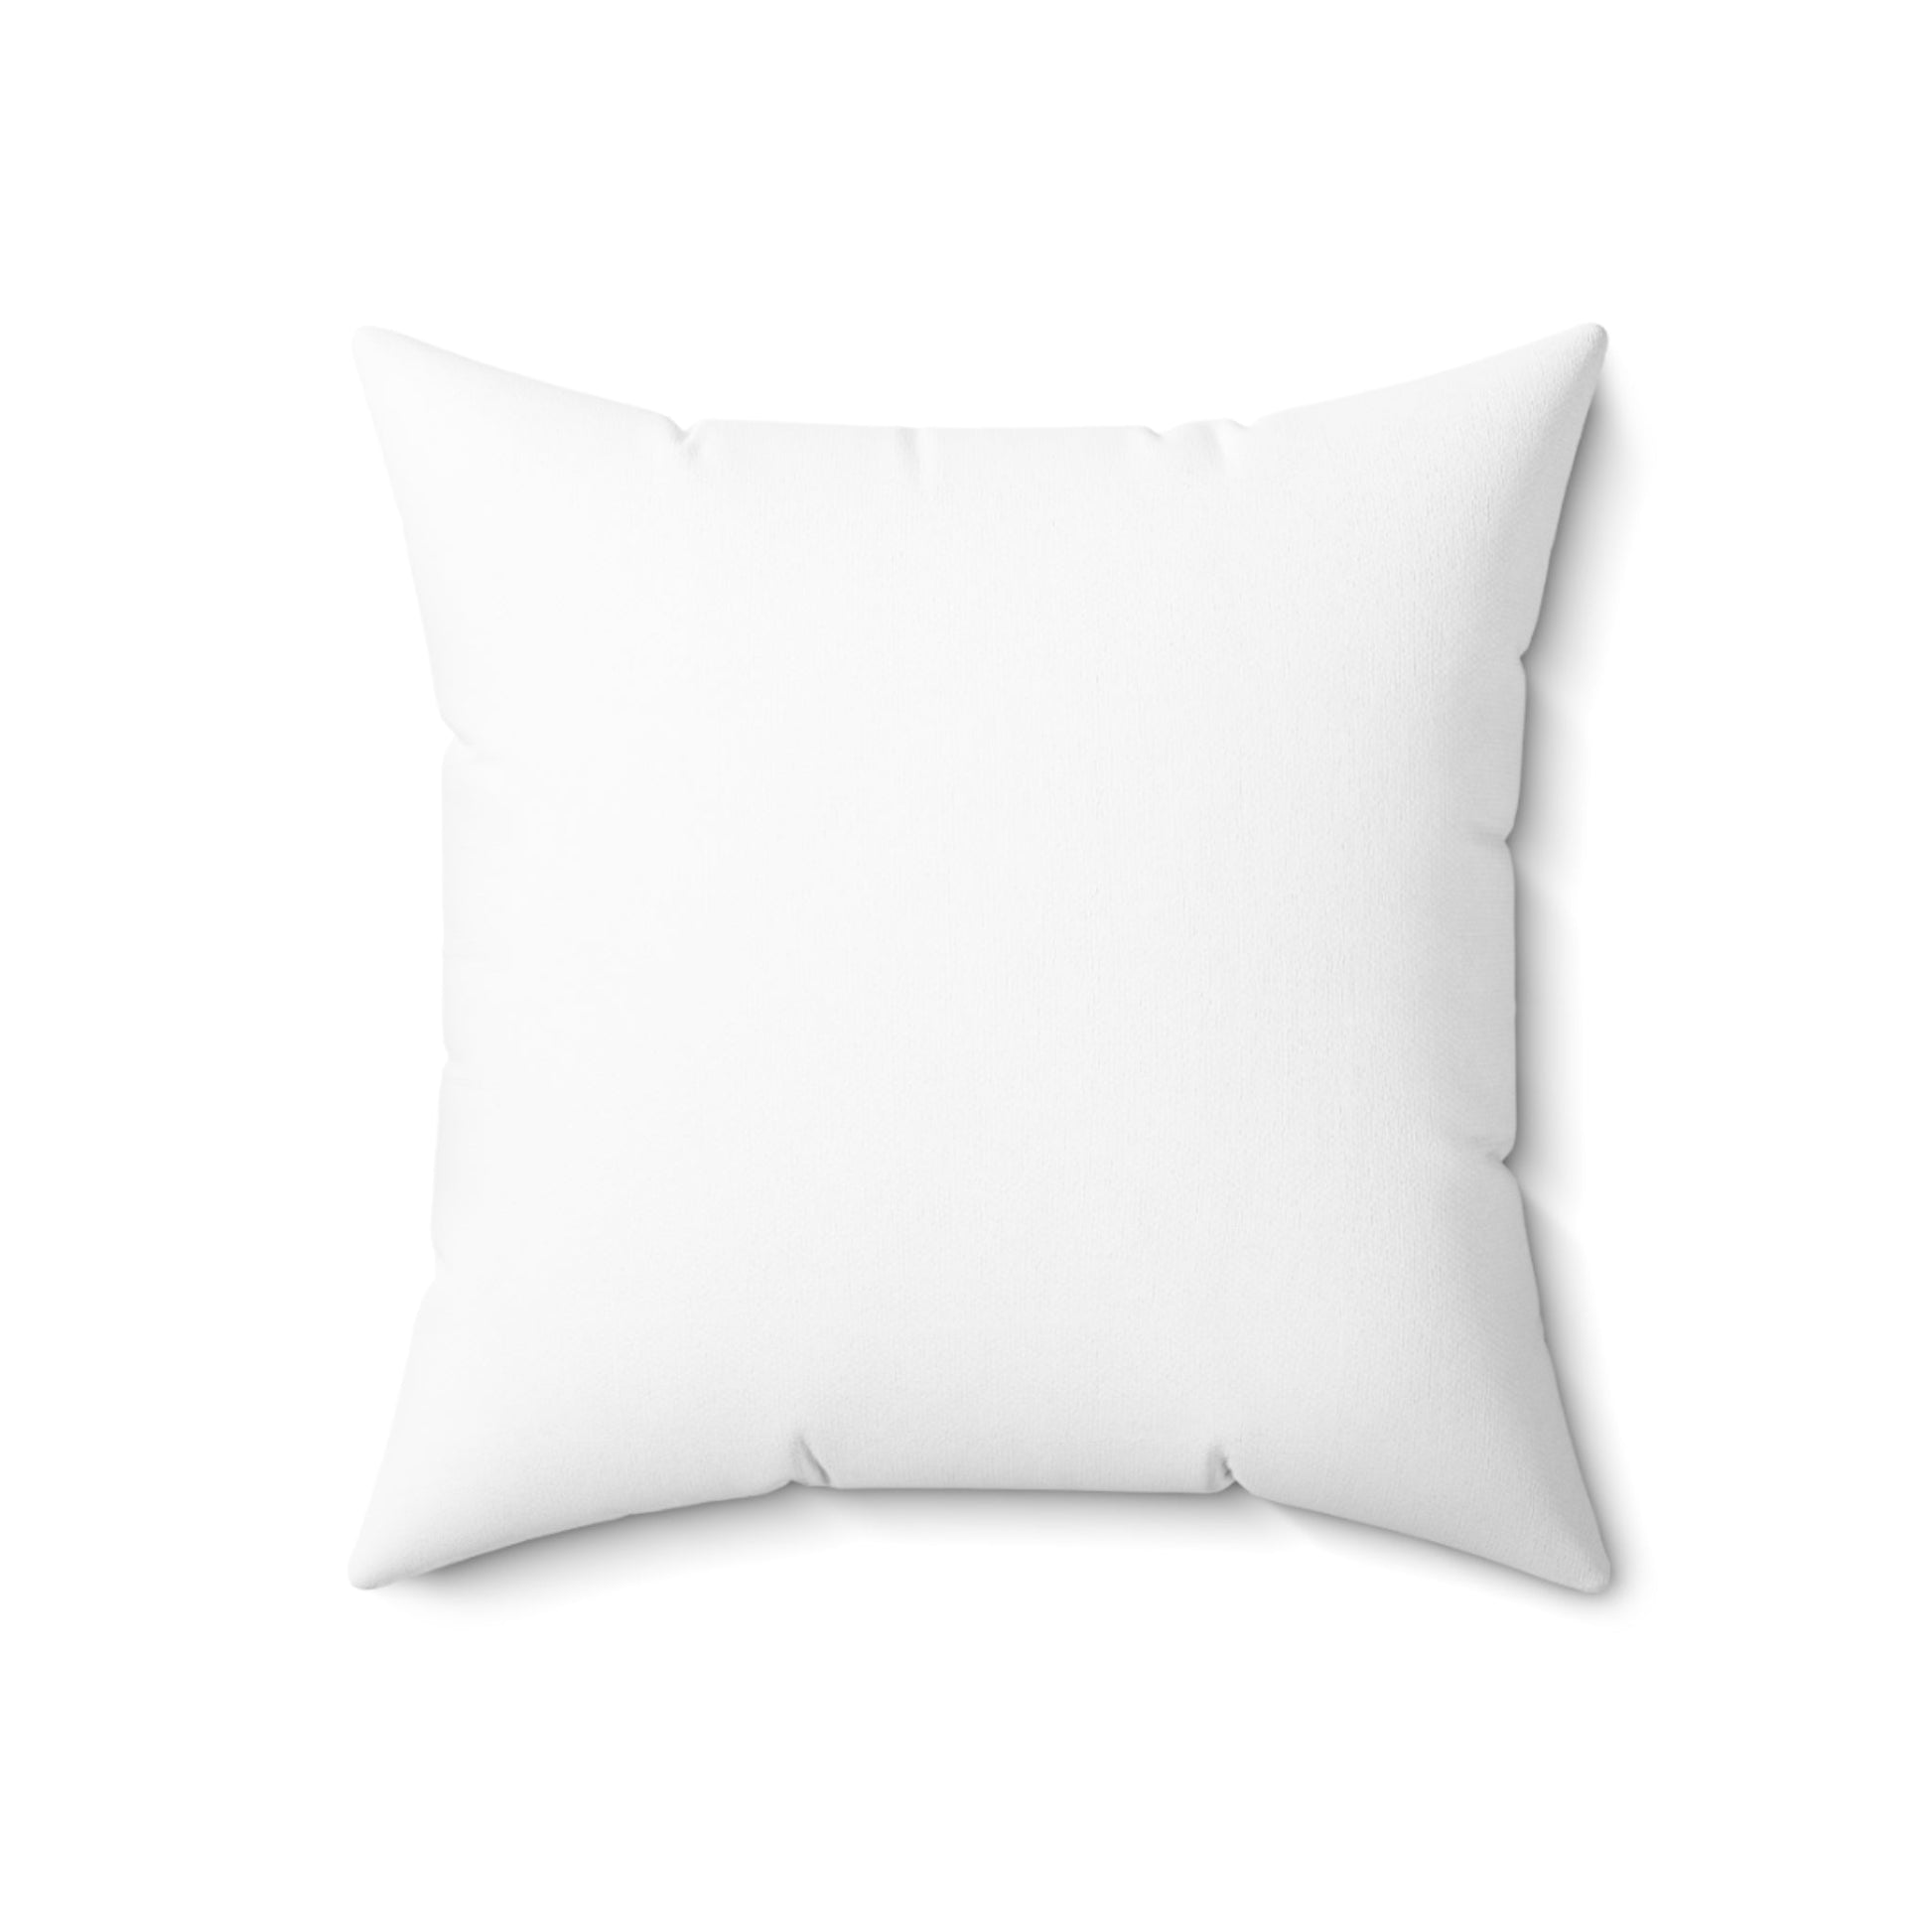 Home Decor Crop it like its hot Spun Polyester Square Pillow LEATHERDADDY BATOR